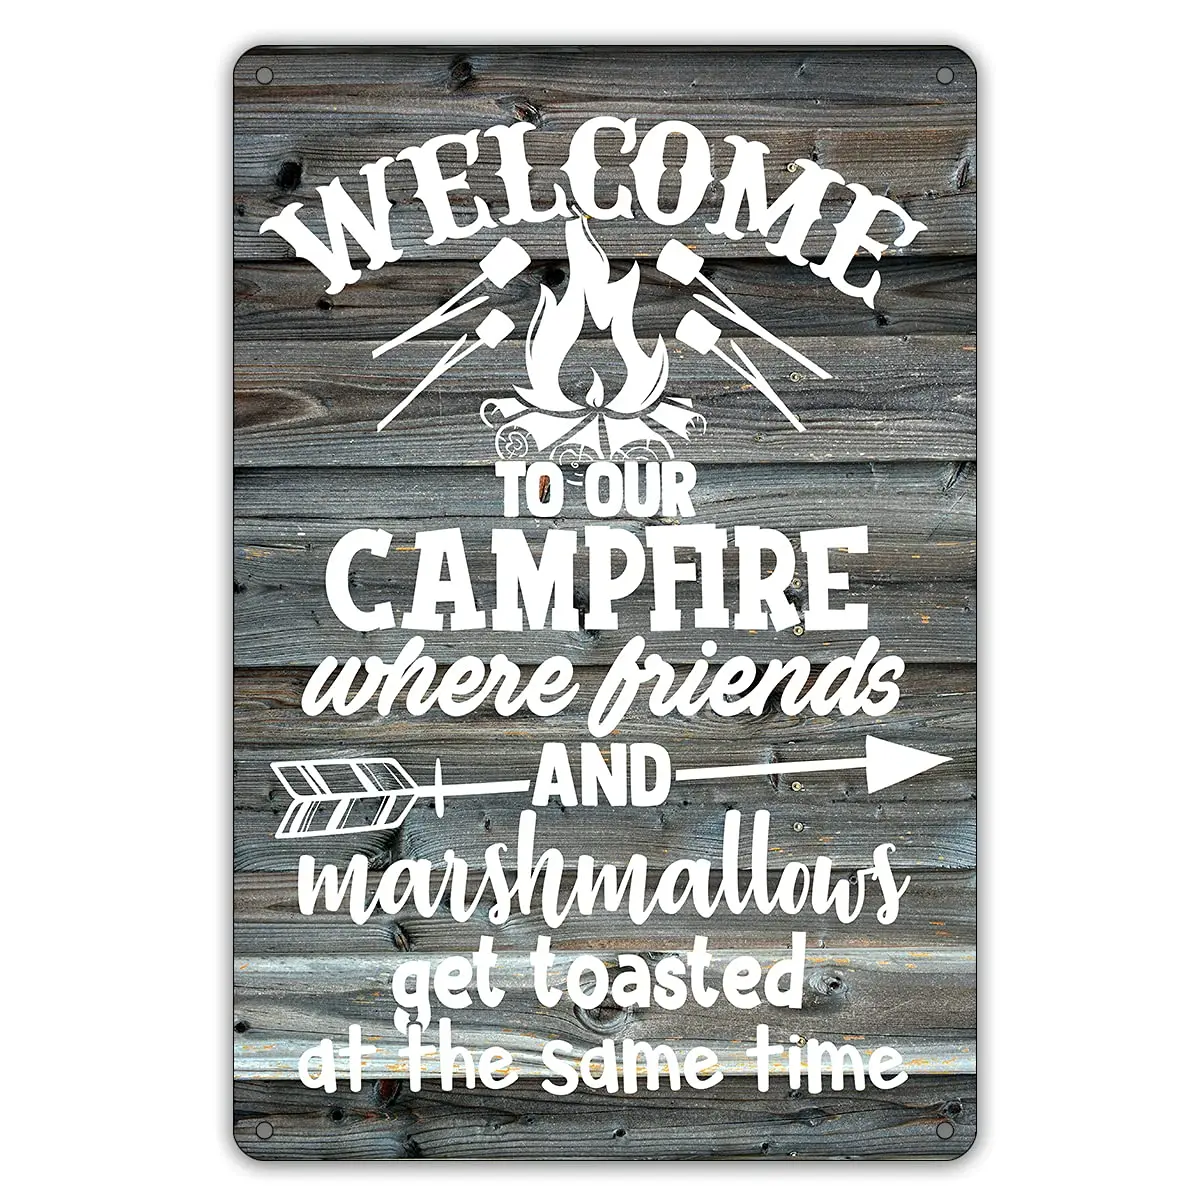 

Welcome to Our Campsite Metal Tin Sign Wall Farmhouse Rustic Camping Signs for Home Garage Men Cave Decor Camper Gifts